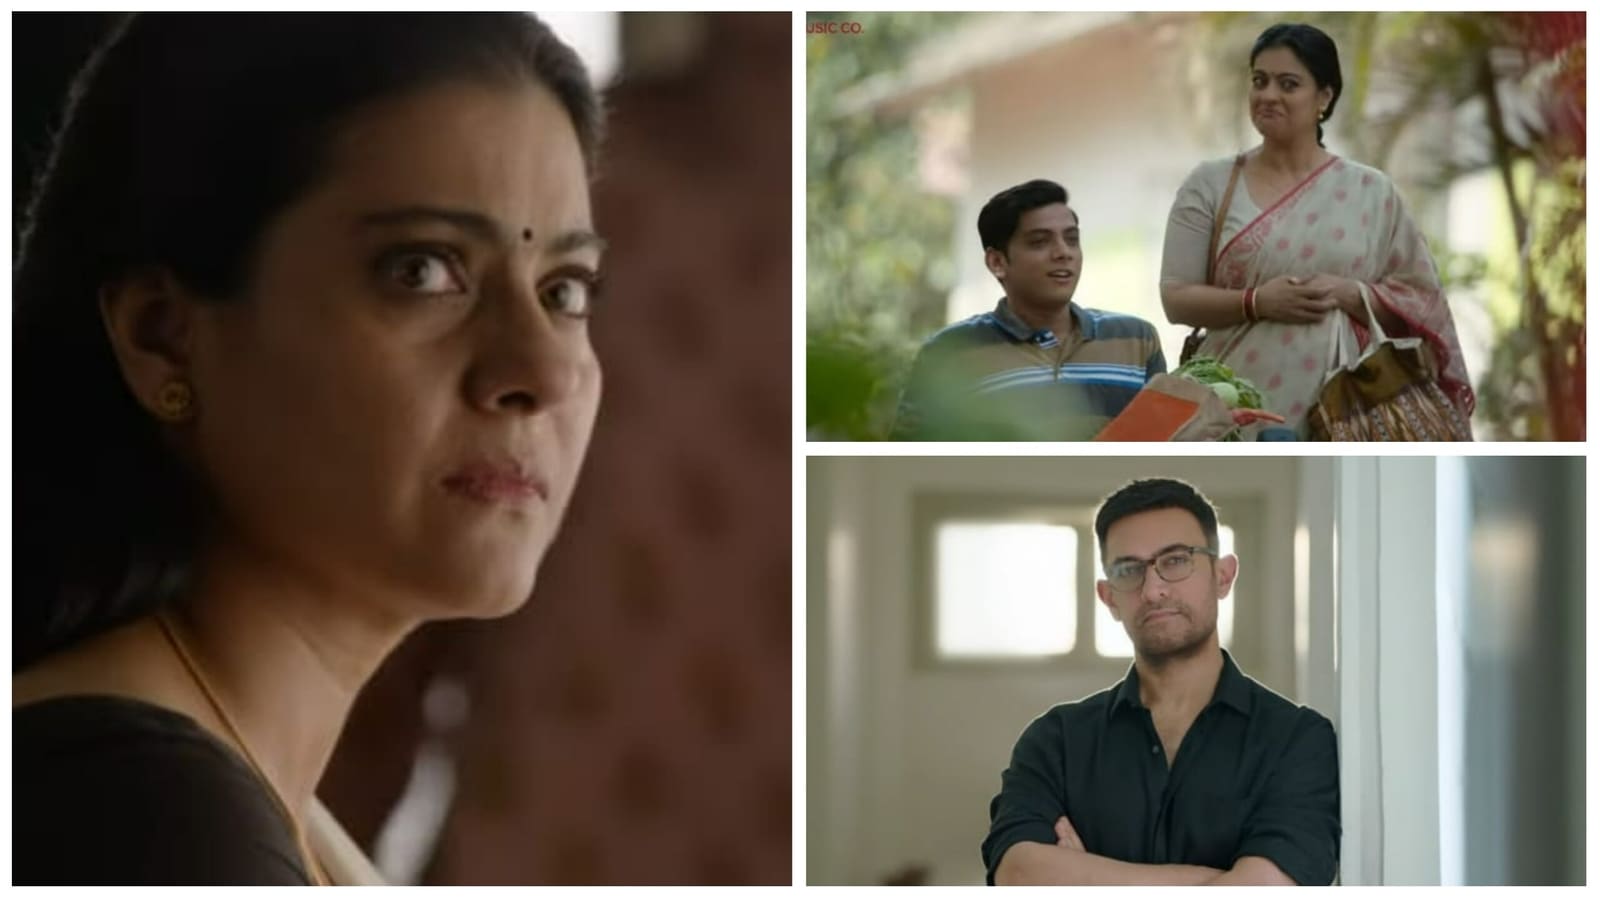 Salaam Venky trailer: Kajol is strong mom looking after terminally-ill son, Aamir Khan’s cameo surprises fans. Watch